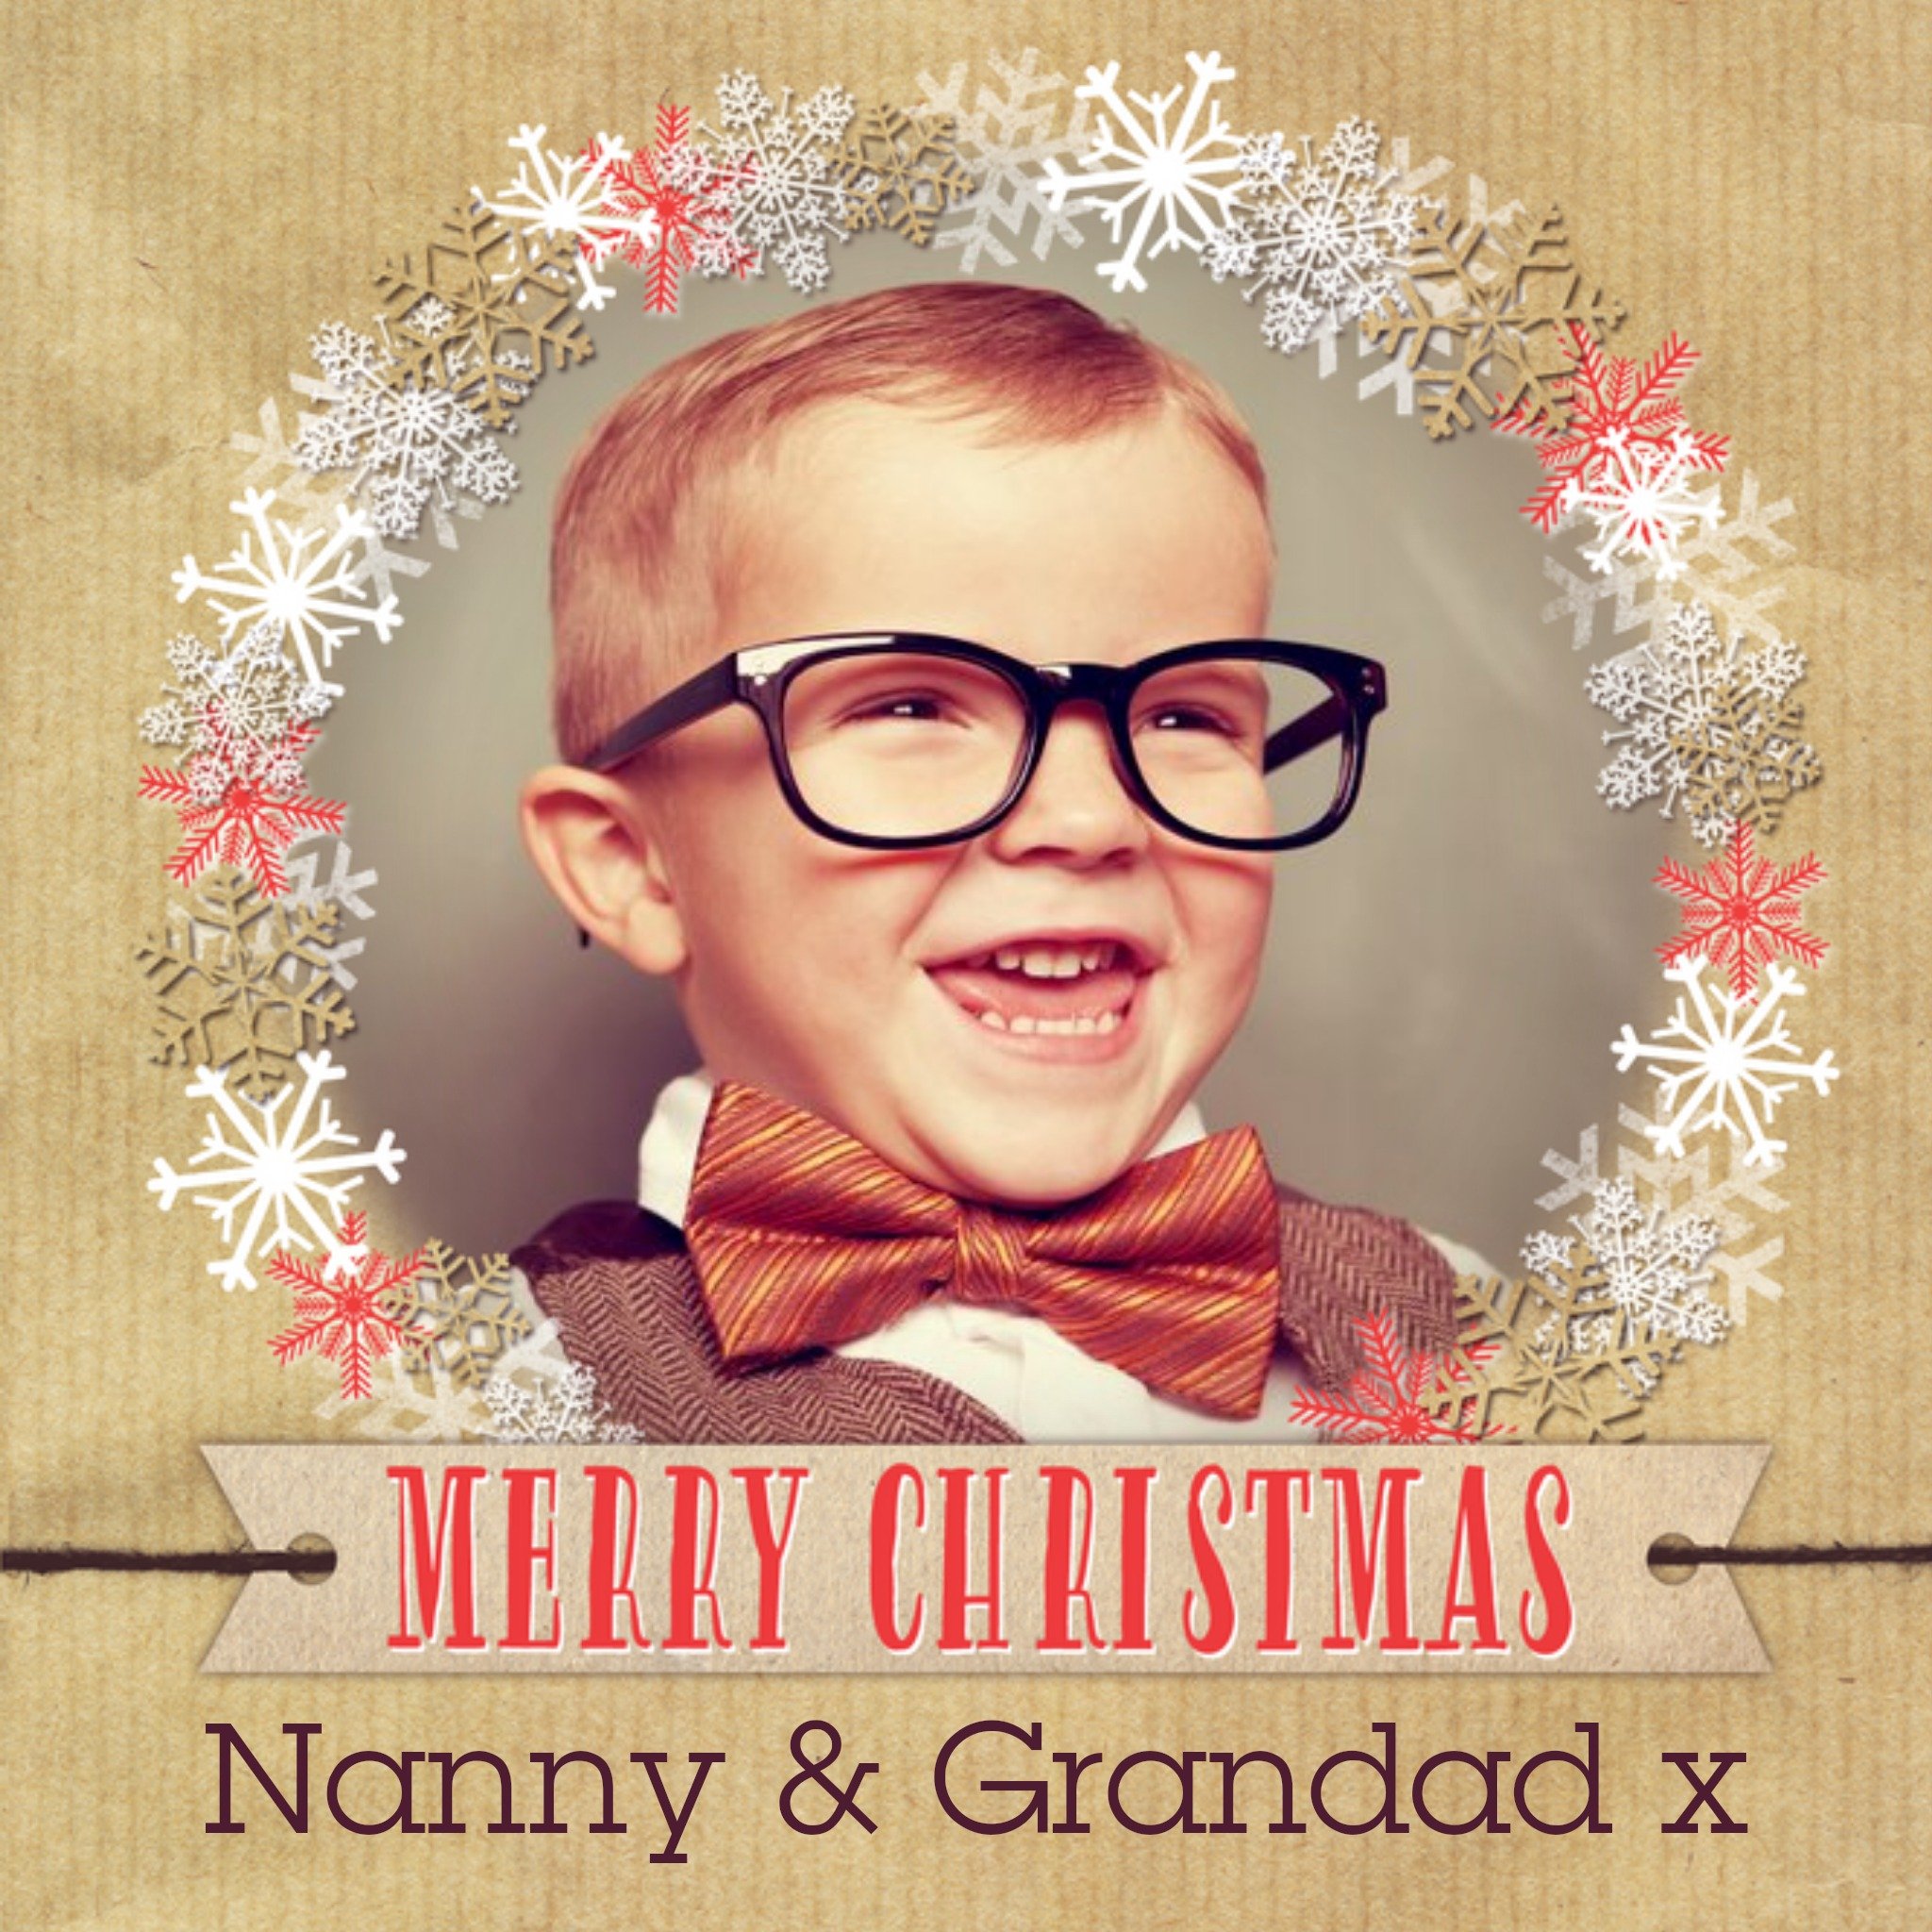 Moonpig Merry Christmas Card For Grandparents, Square